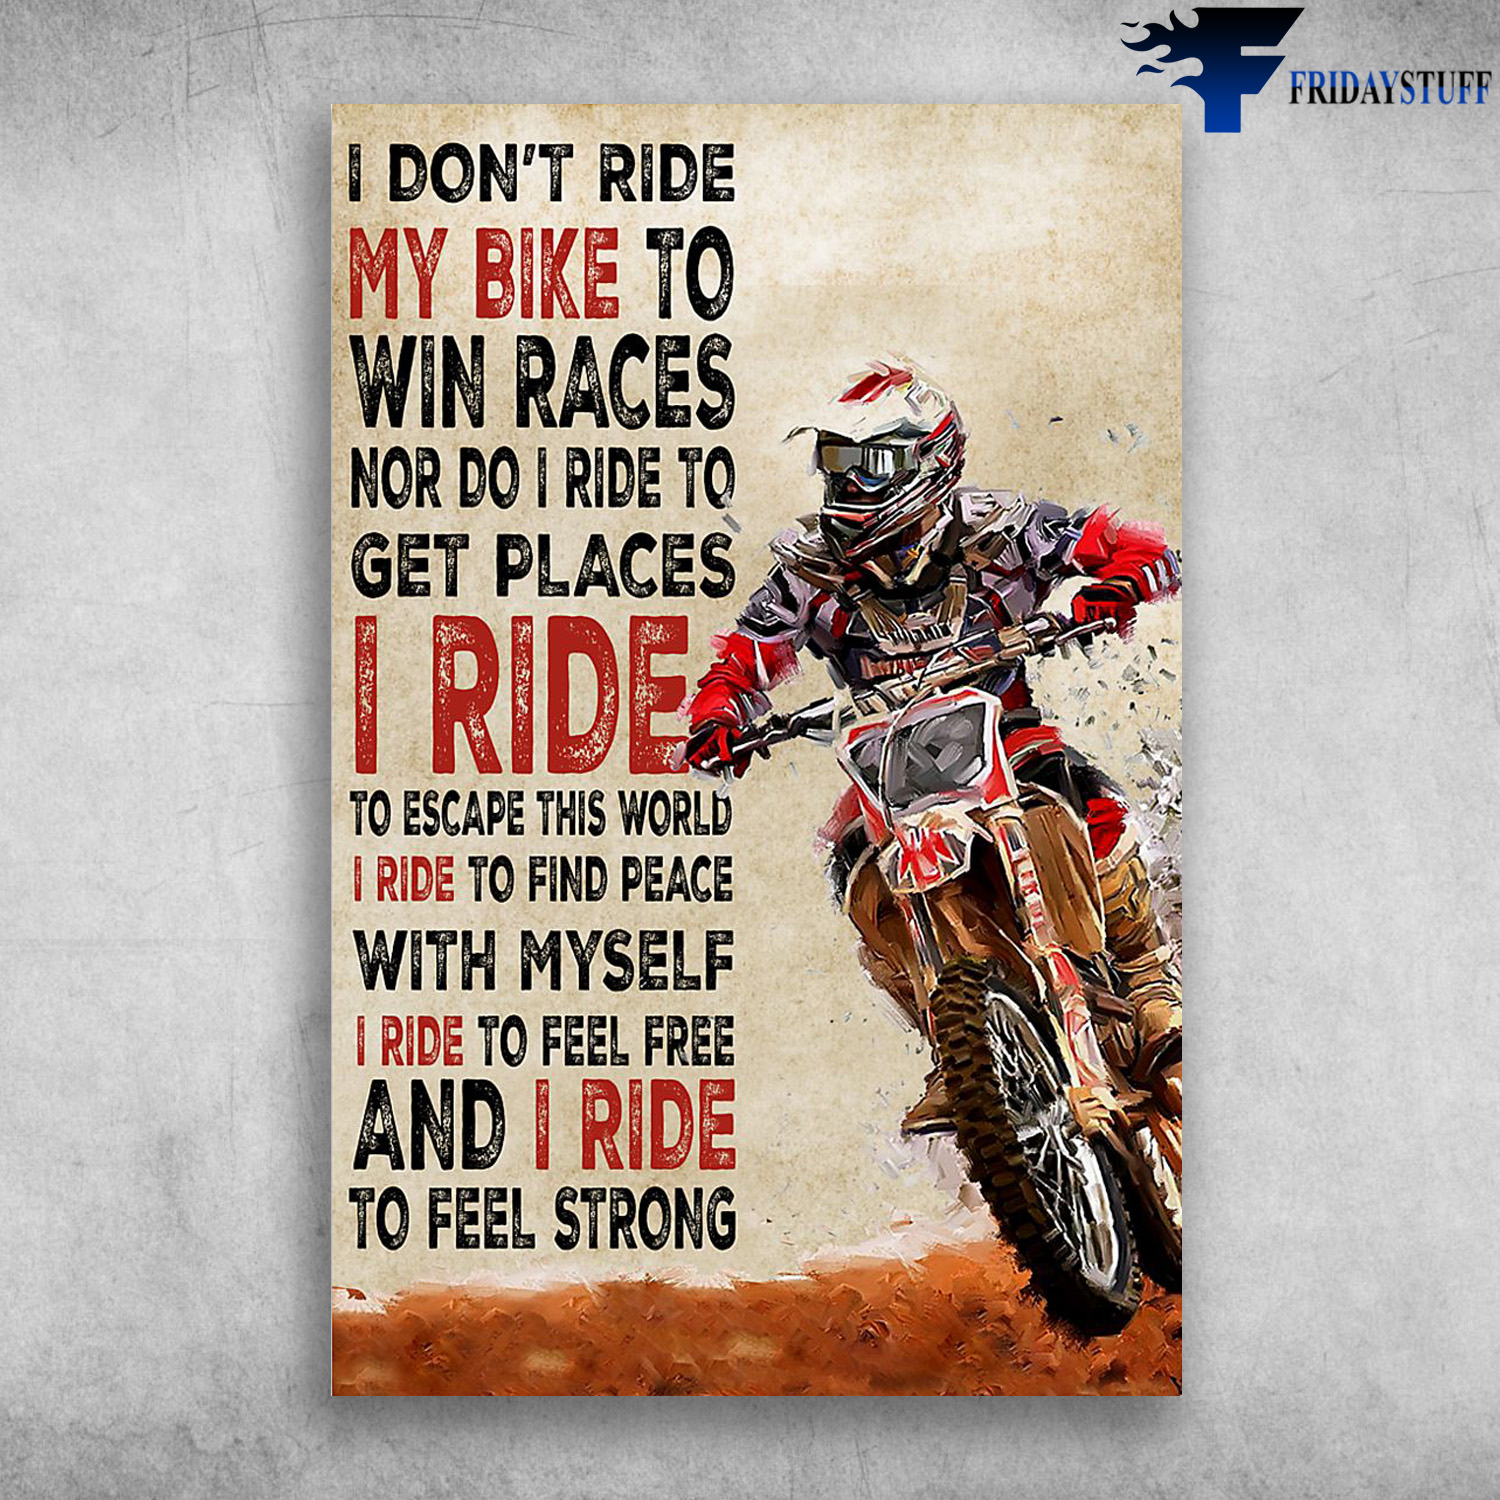 Biker On Motorbike - I Don't Ride My Bike To Win Races Nor Do I Ride To Get Places